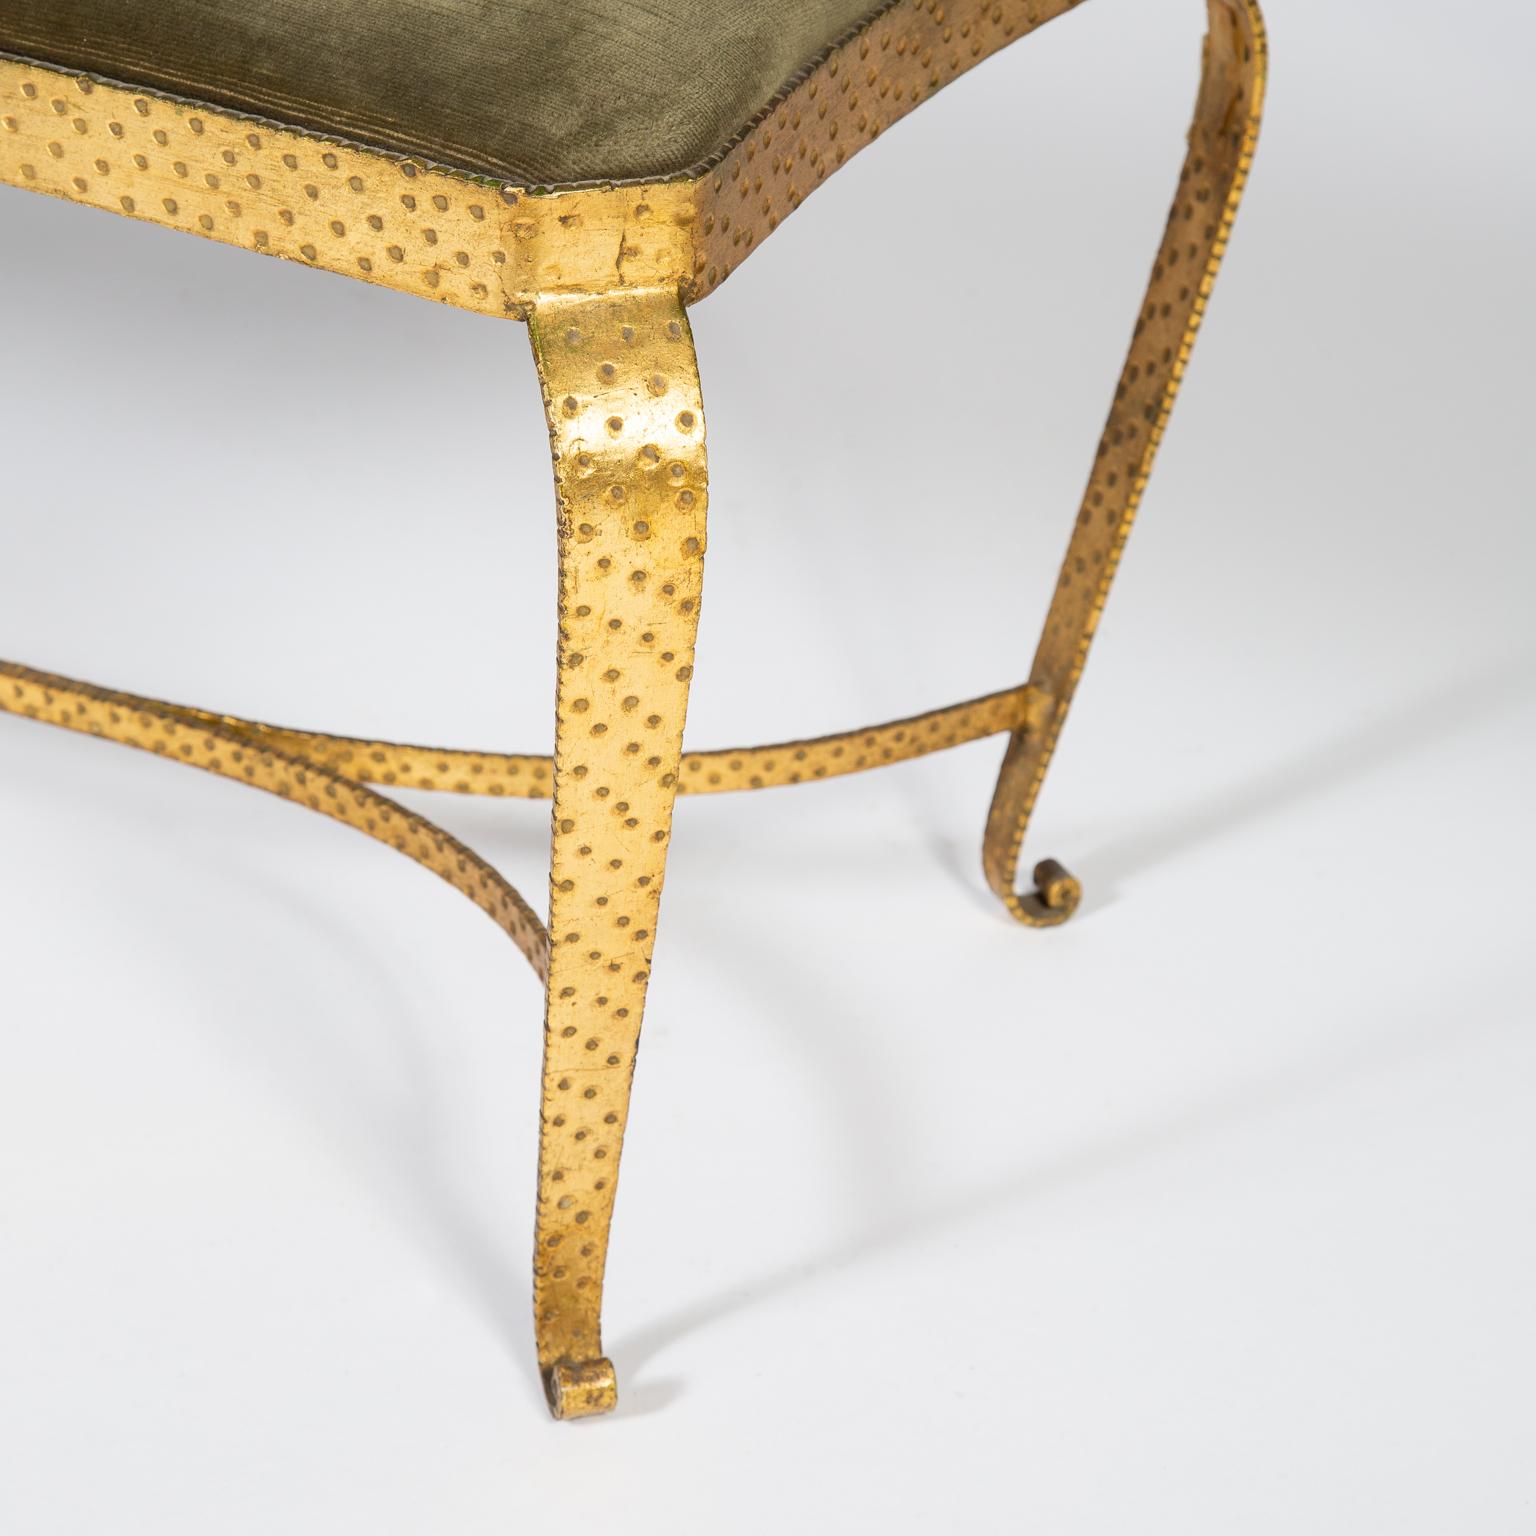 Matching single stool and small bench set in hammered wrought iron with a gilt finish, designed by Pier Luigi Colli. Original green velvet upholstery.

Individual item dimensions:
Stool: 42(W) x 41(D) x 40(H)cm 
Bench: 40(D) x 90(L) x 40(H)cm
 